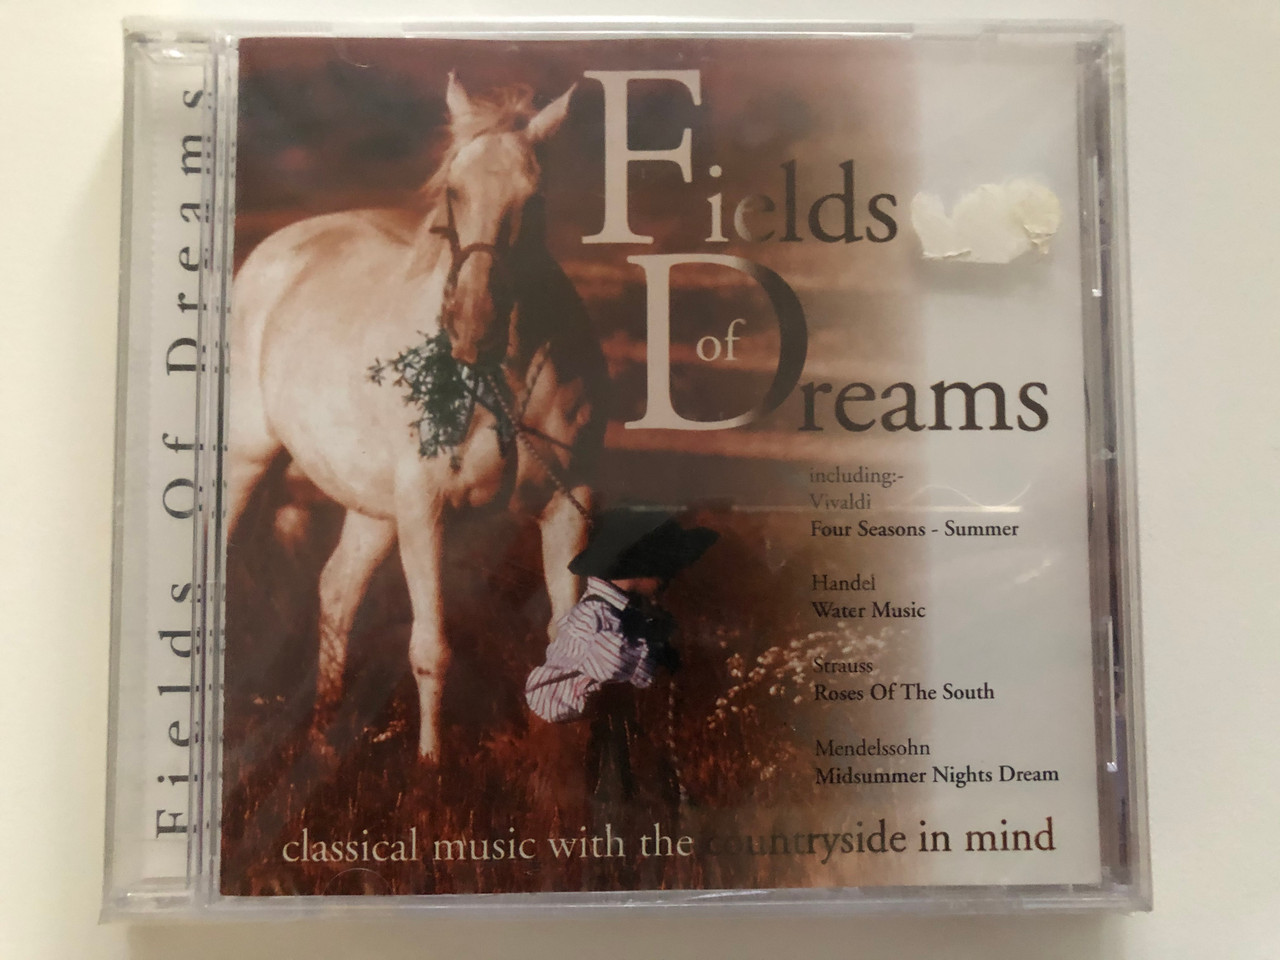 https://cdn10.bigcommerce.com/s-62bdpkt7pb/products/31091/images/183132/Fields_Of_Dreams_-_Classical_Music_With_The_Countryside_In_Mind_Including_Vivaldi_-_Four_Seasons_-_Summer_Handel_-_Water_Music_Strauss_-_Roses_Of_The_South_Mendelssohn_-_Midsummer_Nights_1__02806.1625124225.1280.1280.JPG?c=2